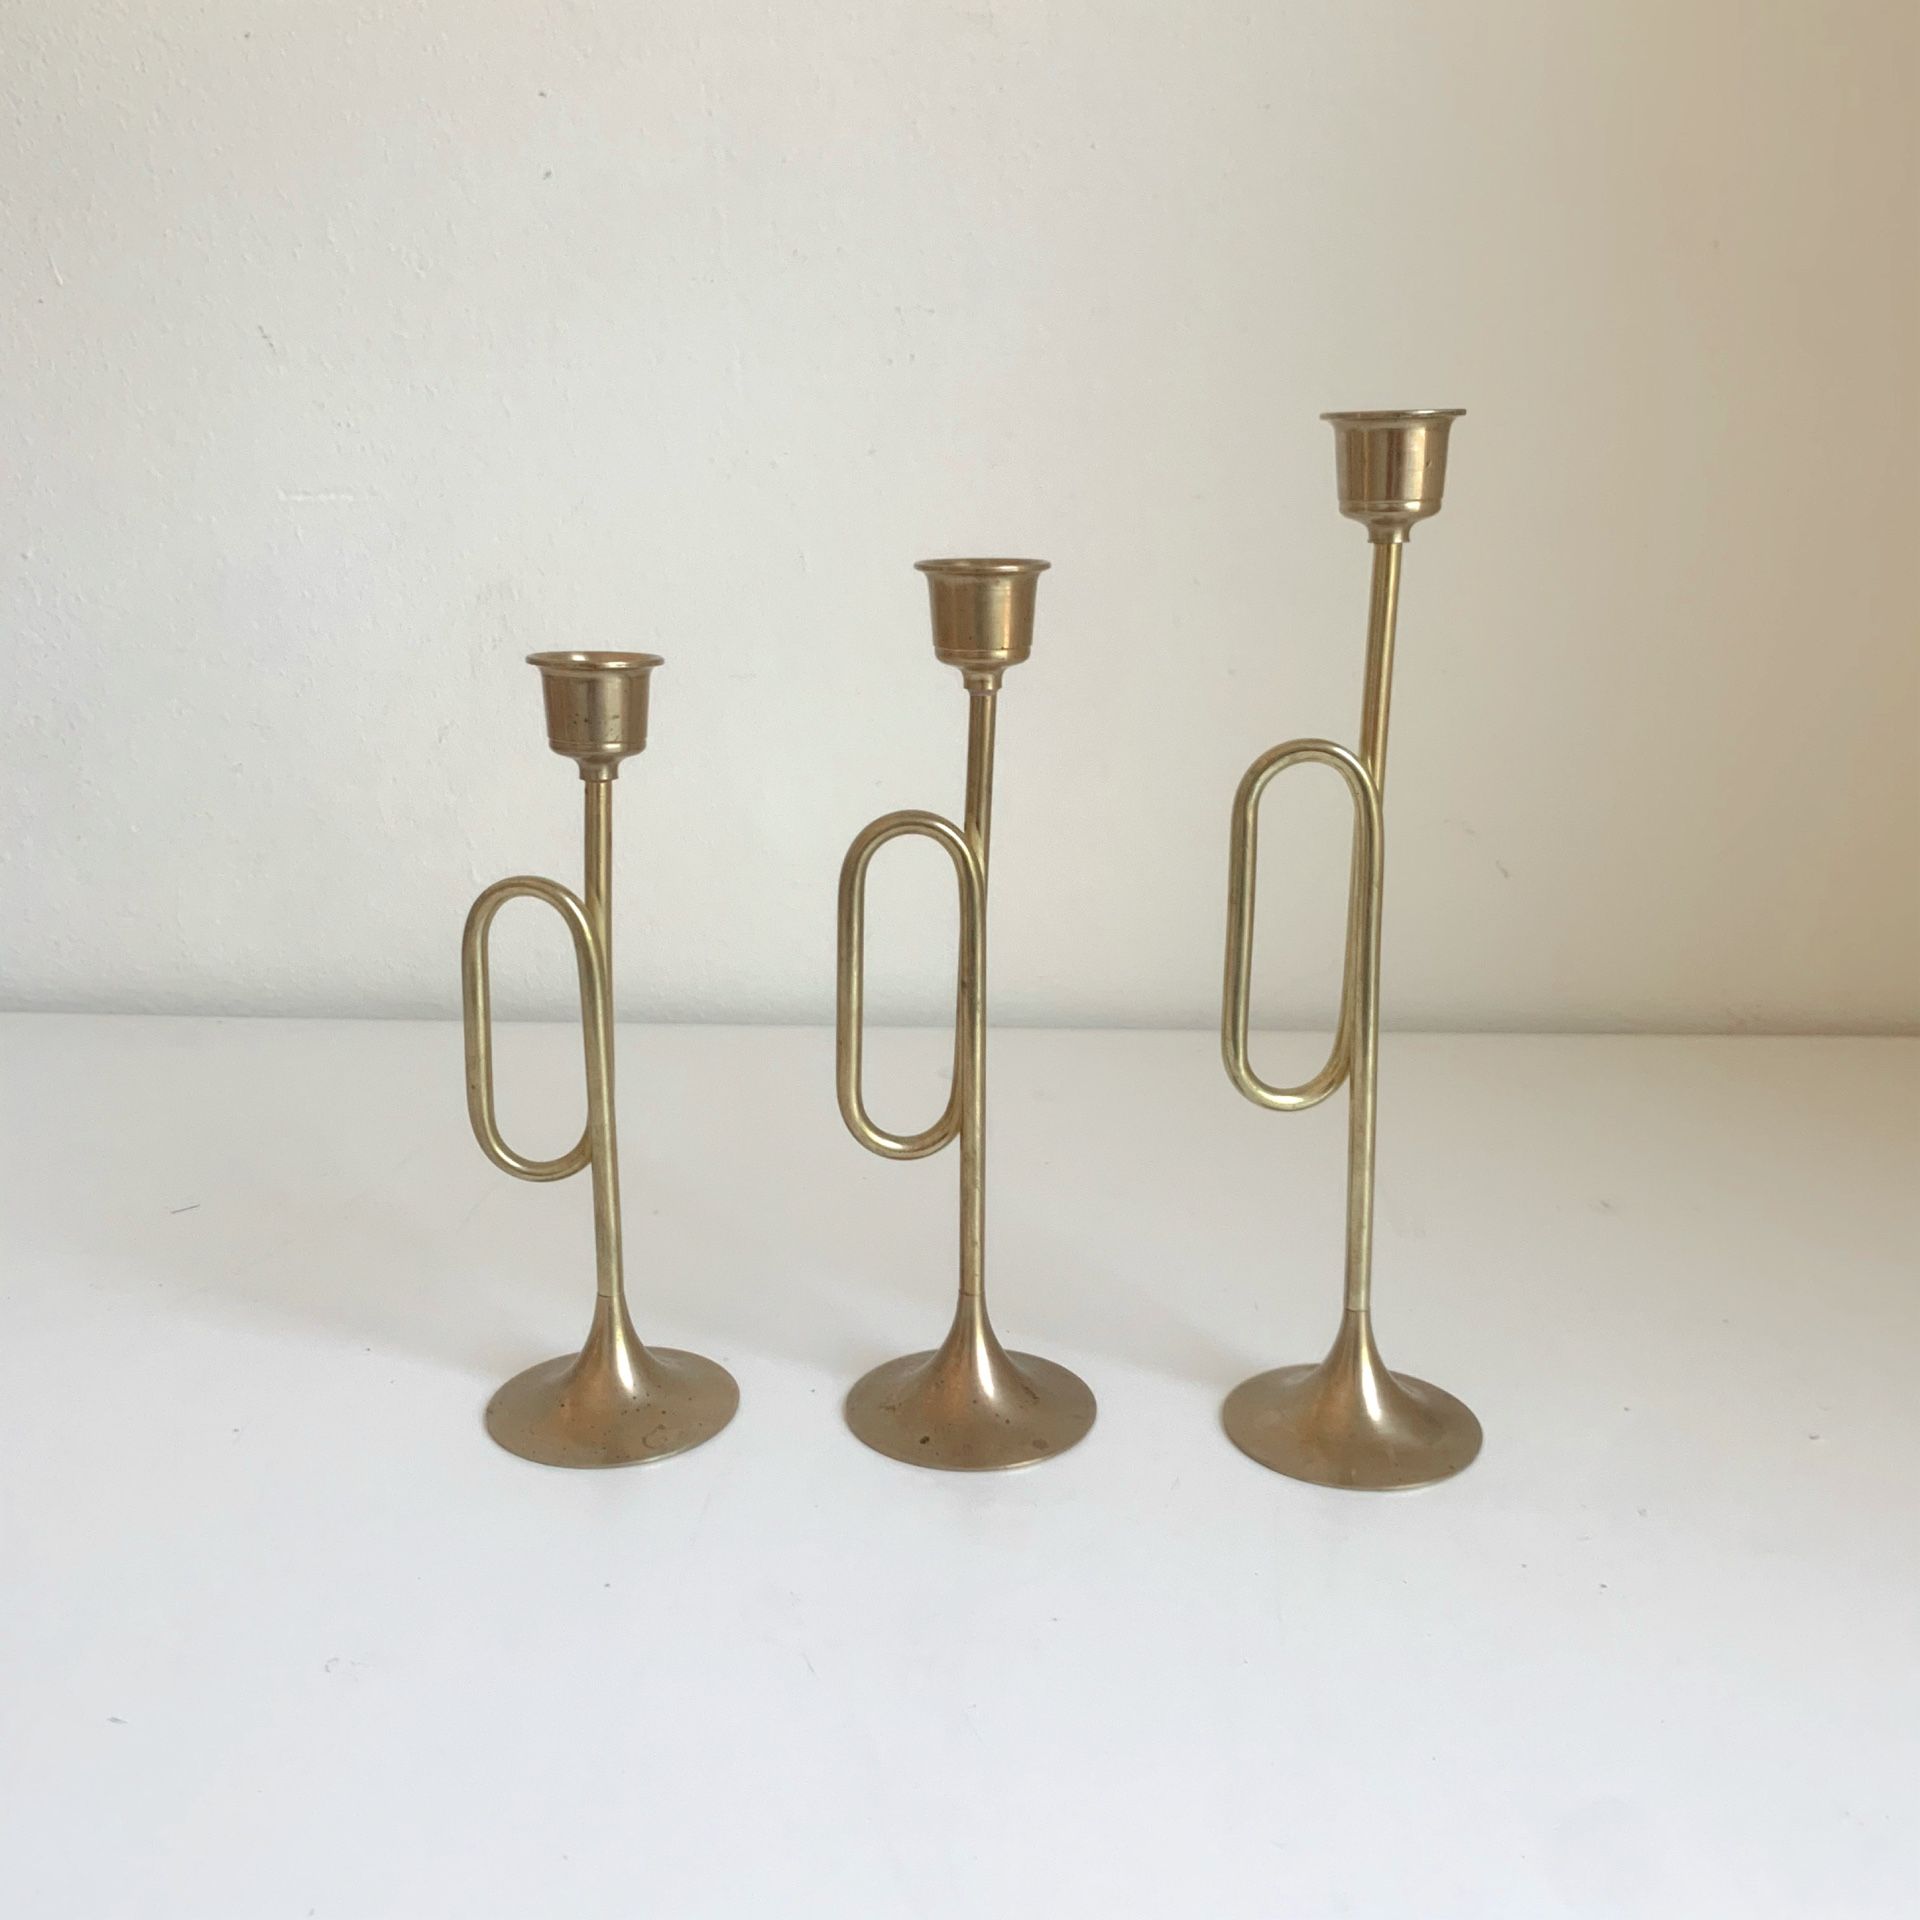 Brass Candle Holders (set of 3)